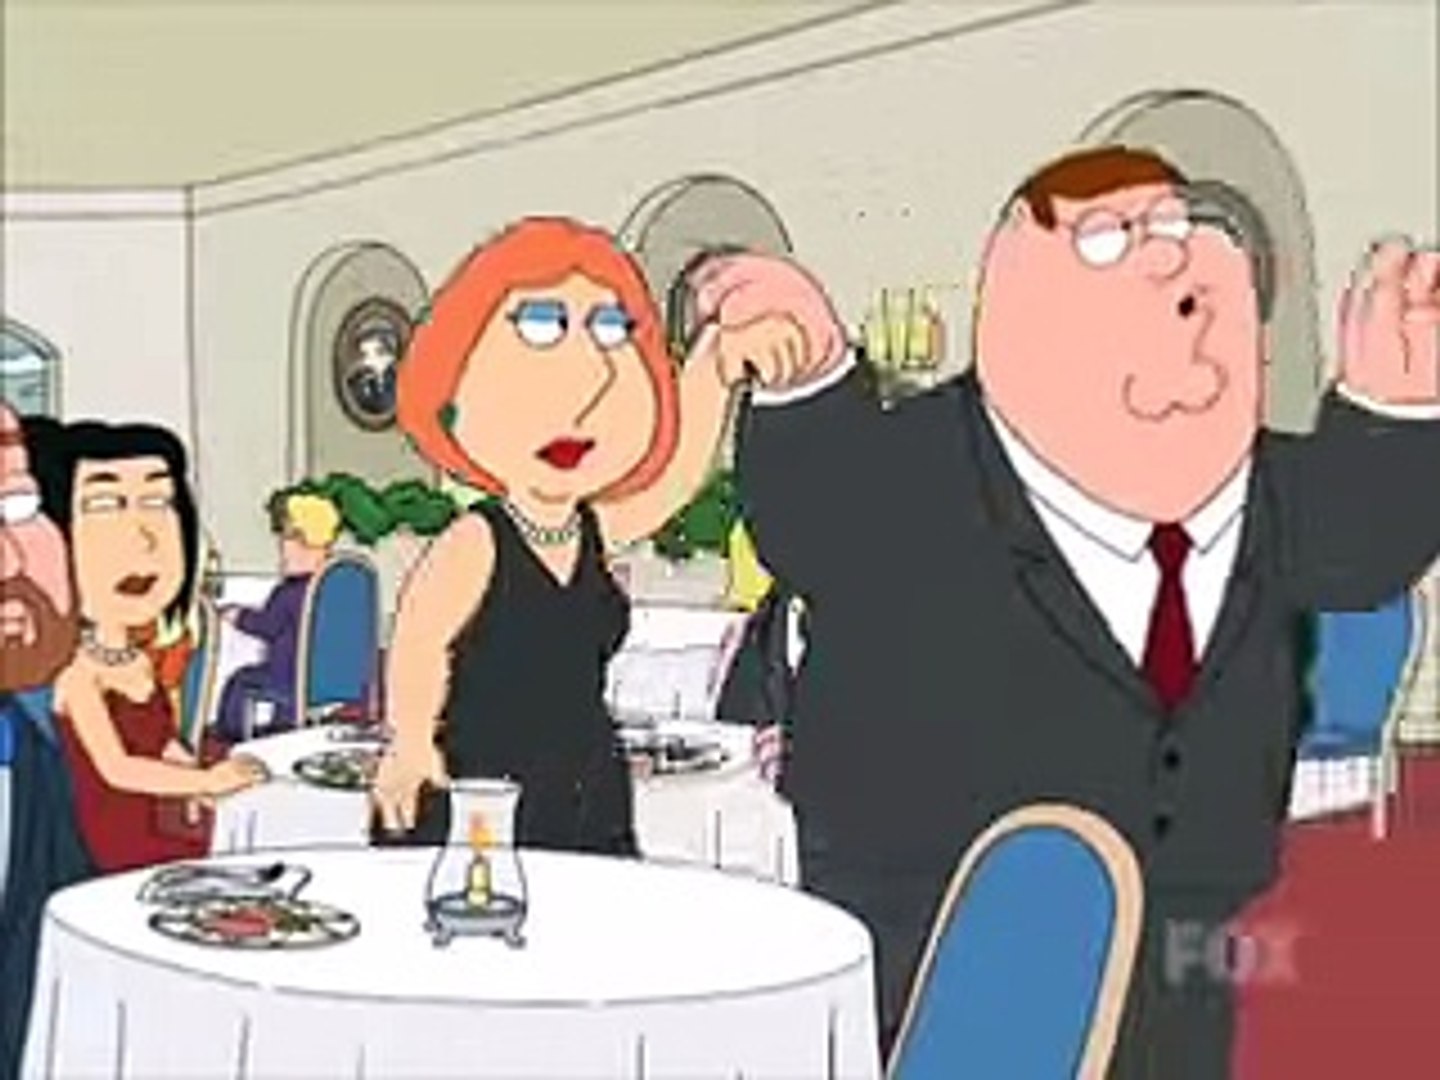 Lois griffin inflation